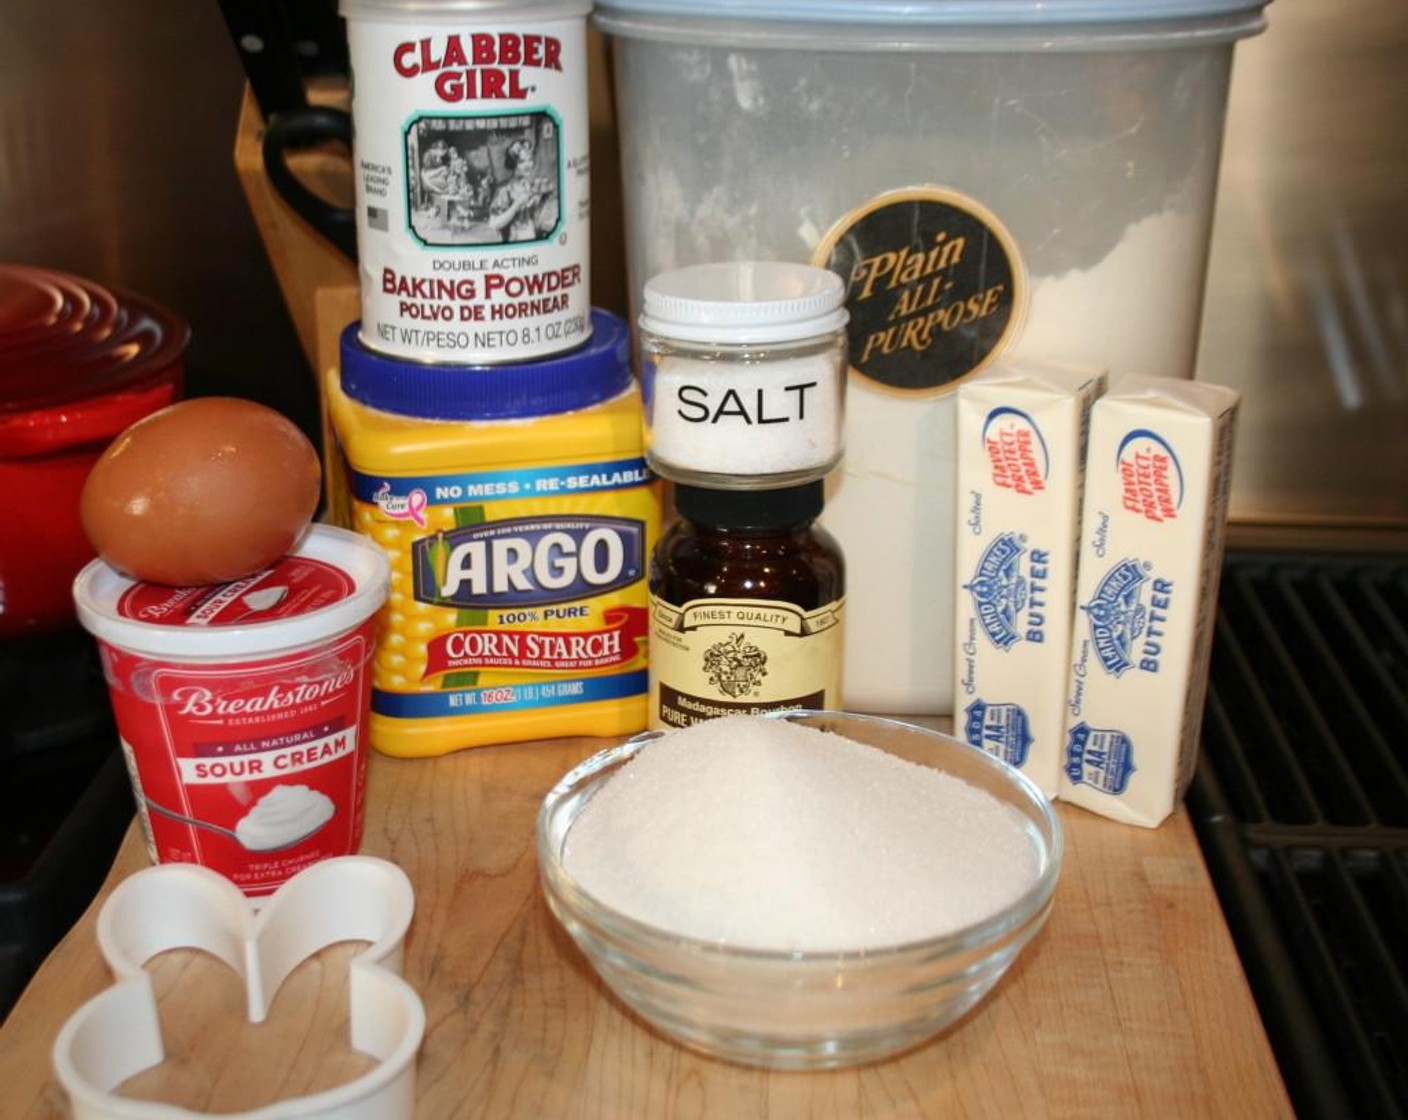 step 1 In a standing mixer cream Butter (2 sticks), Granulated Sugar (1 1/4 cups), Salt (1 tsp), and Baking Baking Powder (1/2 Tbsp) until light and fluffy. Then add Vanilla Extract (1/2 Tbsp) and Farmhouse Eggs® Large Brown Egg (1), beat well until blended light and fluffy.